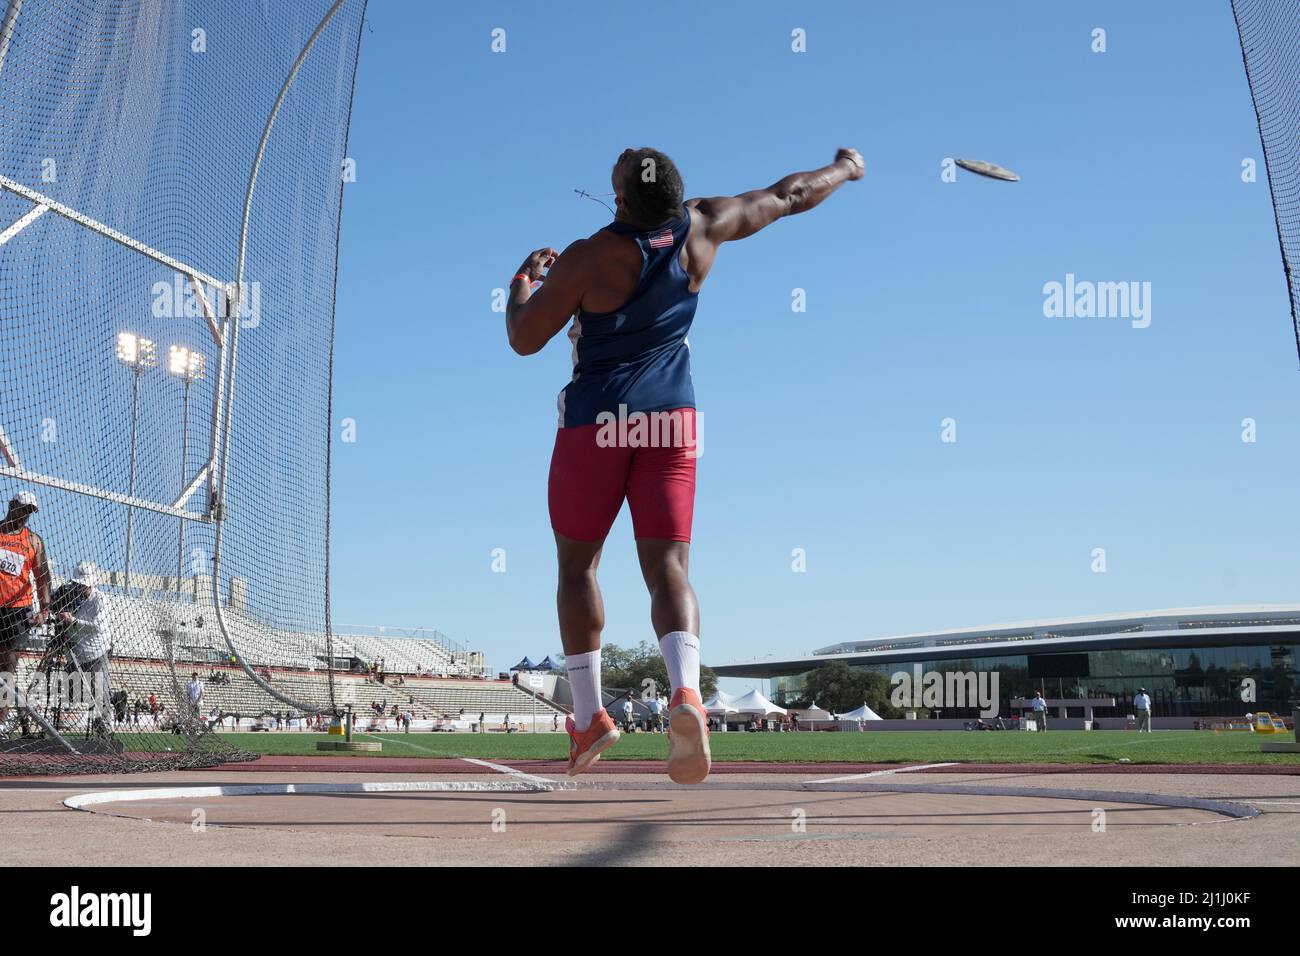 Francois Prinsloo of South Alabama places third in the discus at 191-10 (58.49m) during the 94th Clyde Littlefield Texas Relays, Friday, Mar 25, 2022, Stock Photo